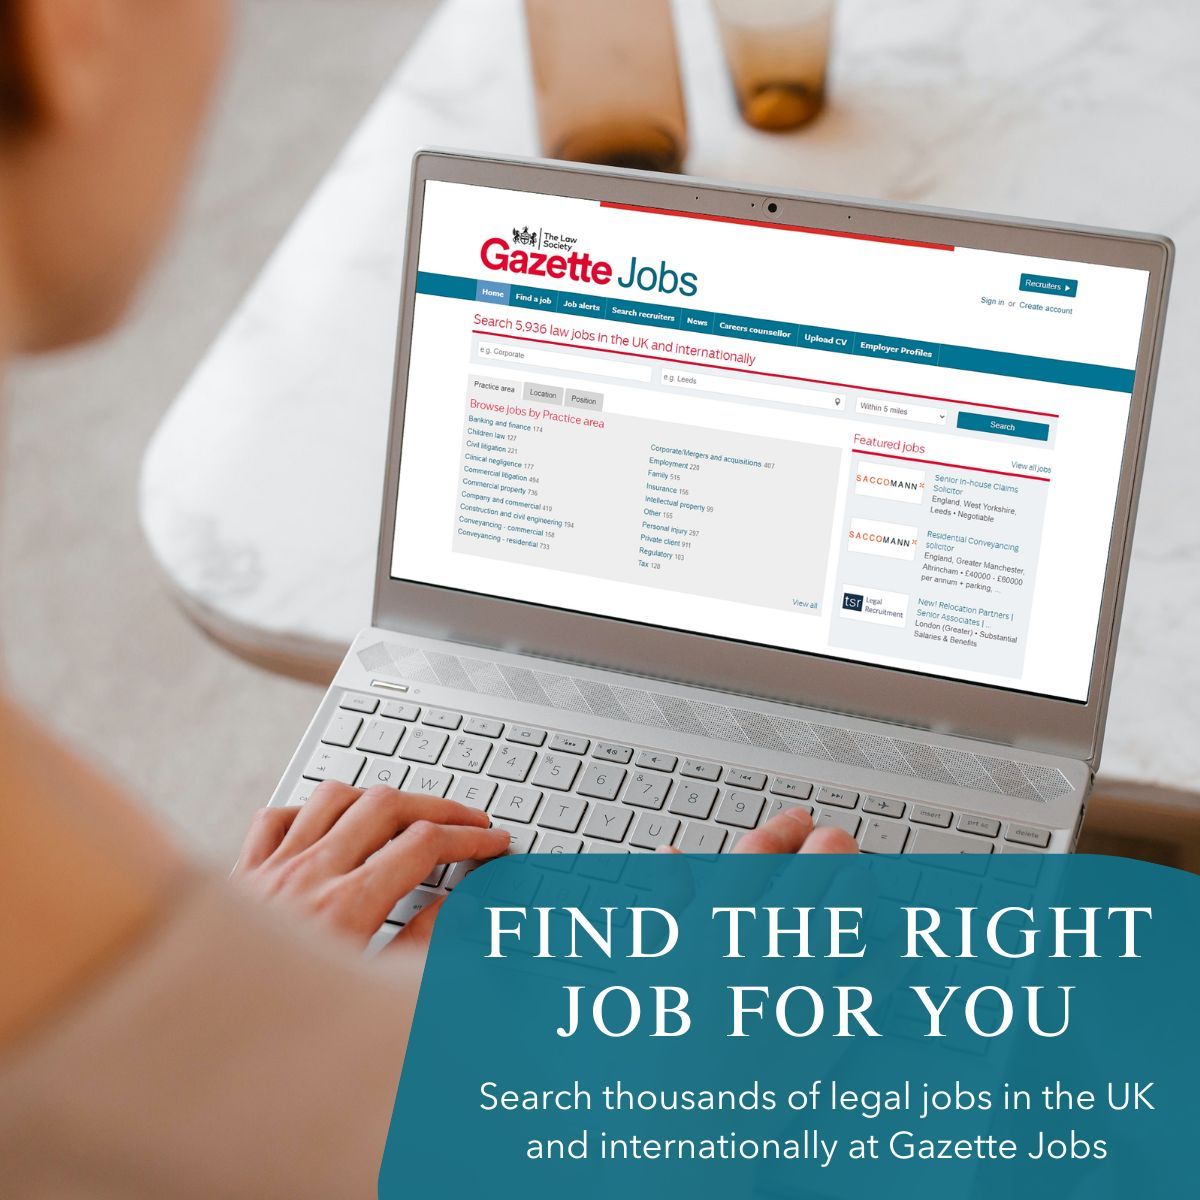 🌞 Any plans for the weekend? If you are at a loose end, why not think about the next step in your career and browse over 6,000 jobs on #LawGazetteJobs, a leading jobs board for legal careers. Browse now -> jobs.lawgazette.co.uk #legalcareers #legaljobsboard #LegalJobs